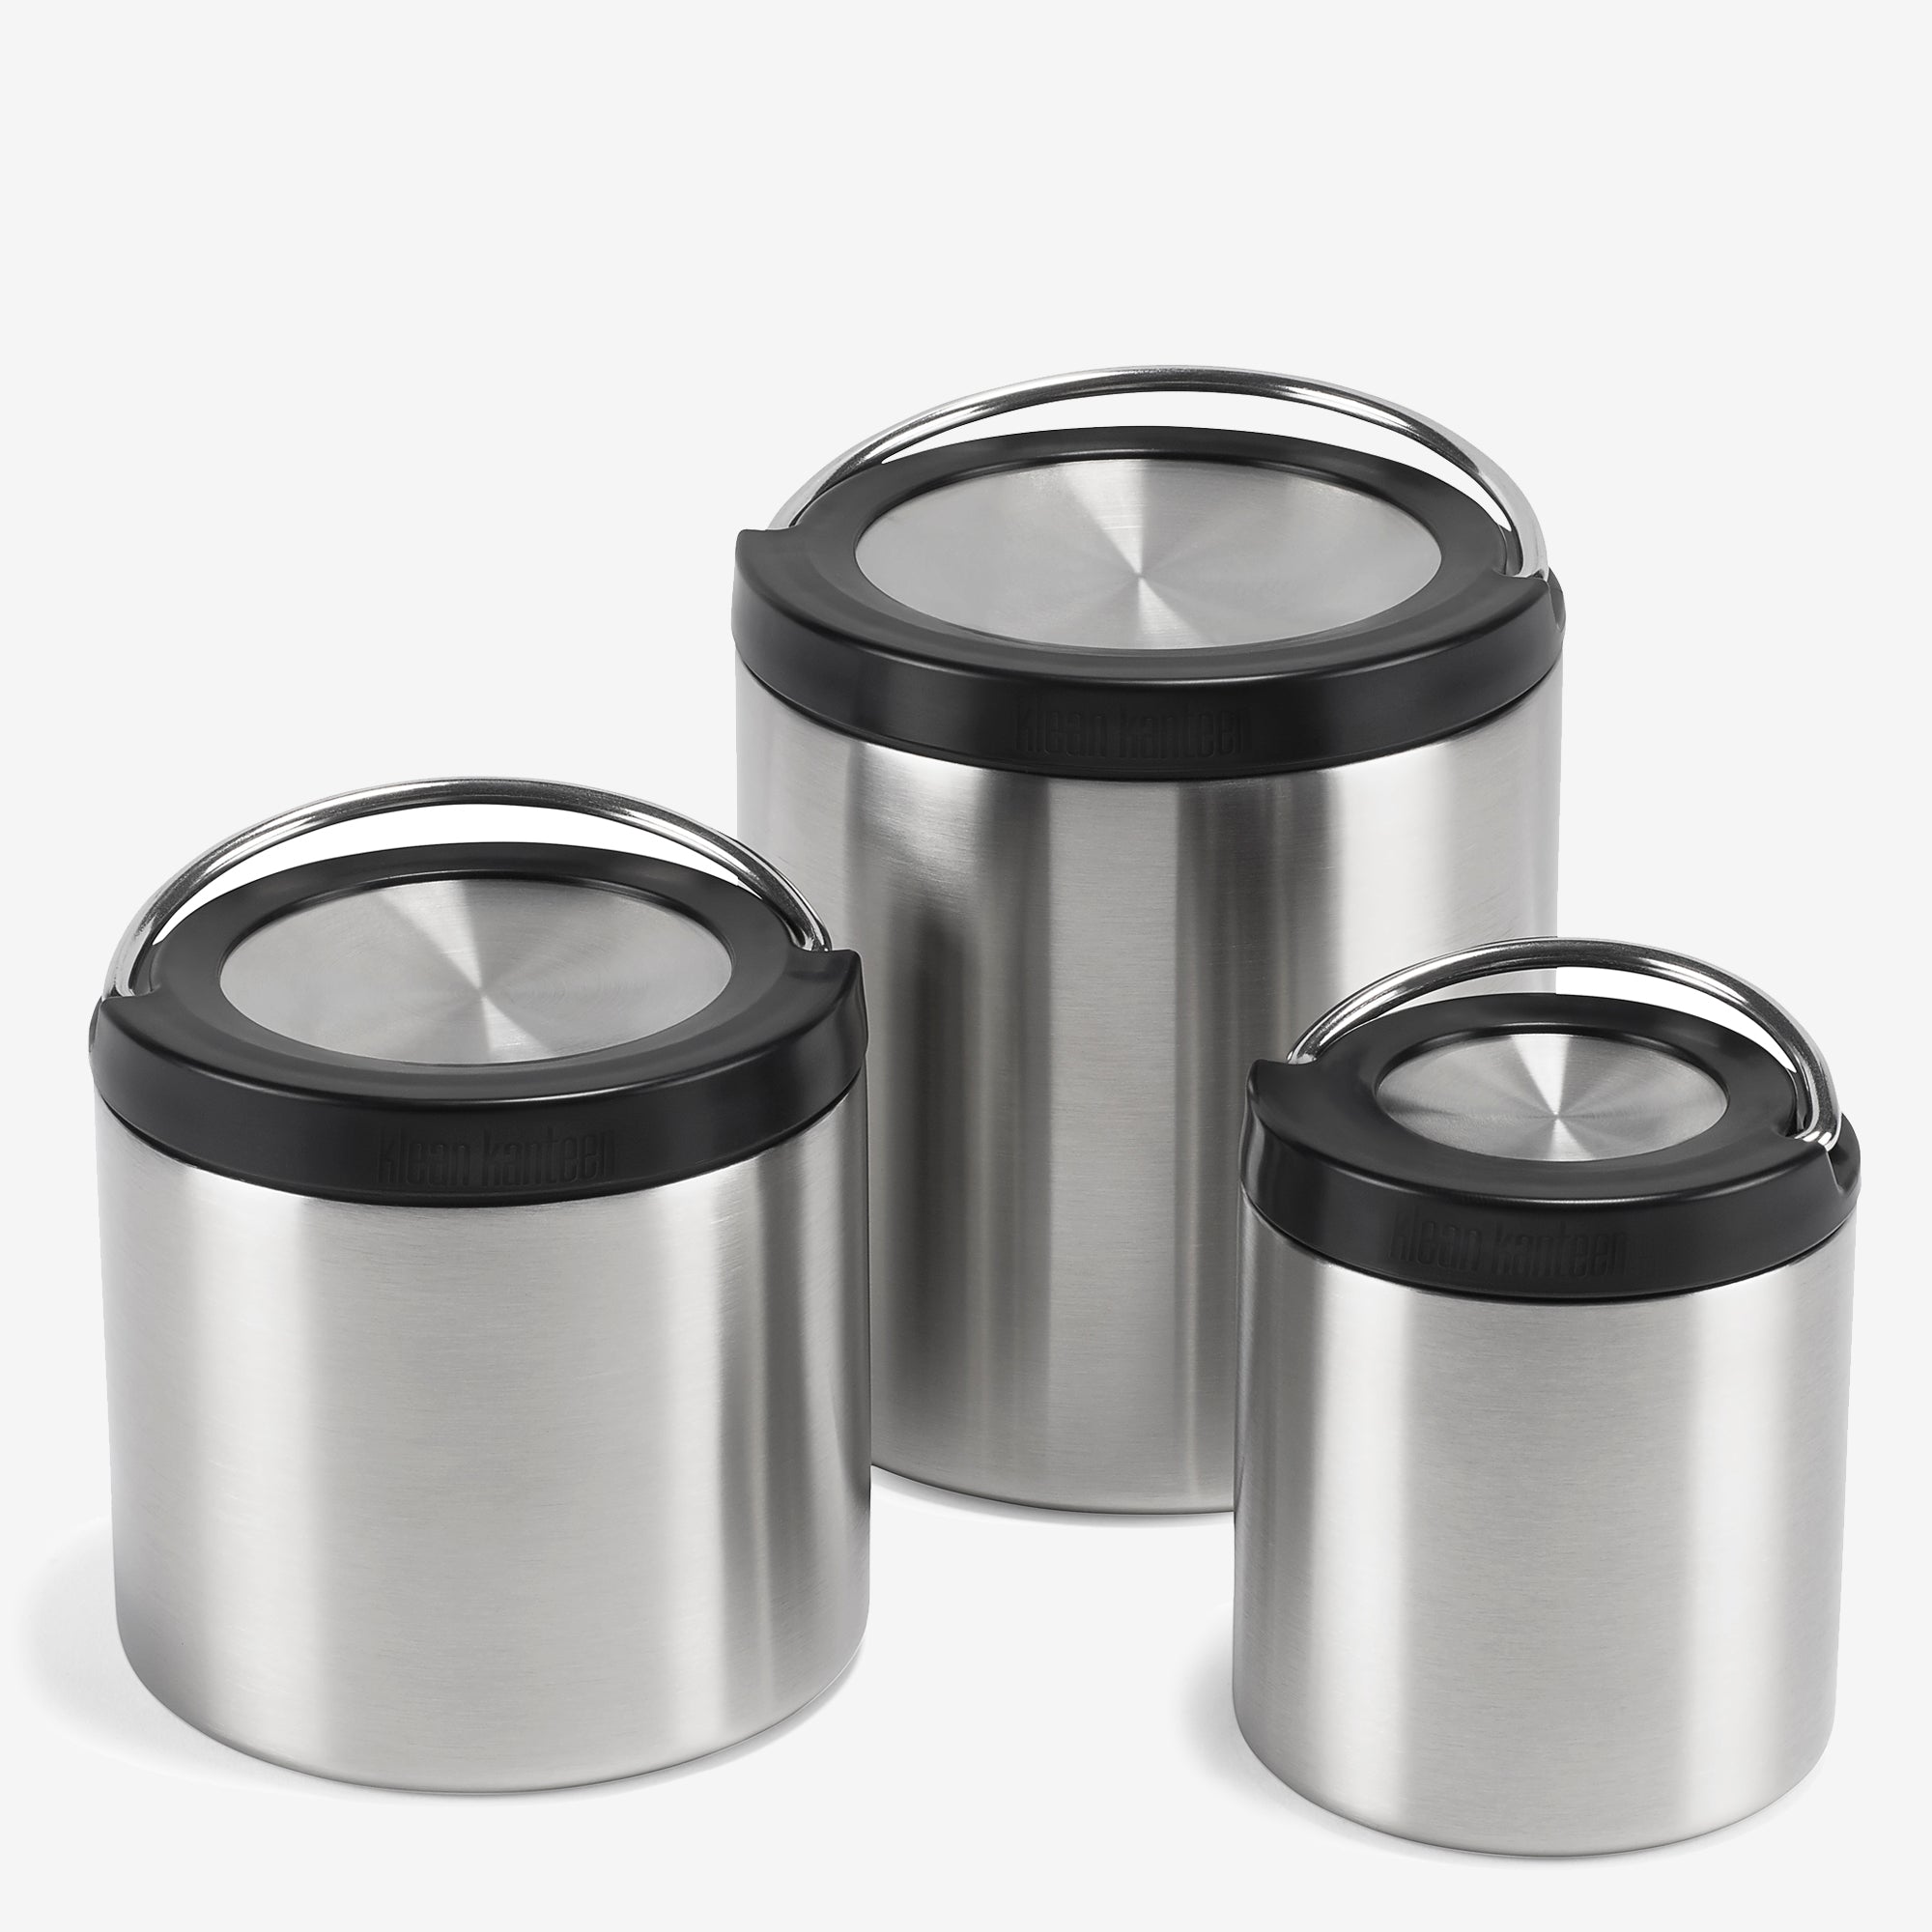 Insulated Food Canister Set